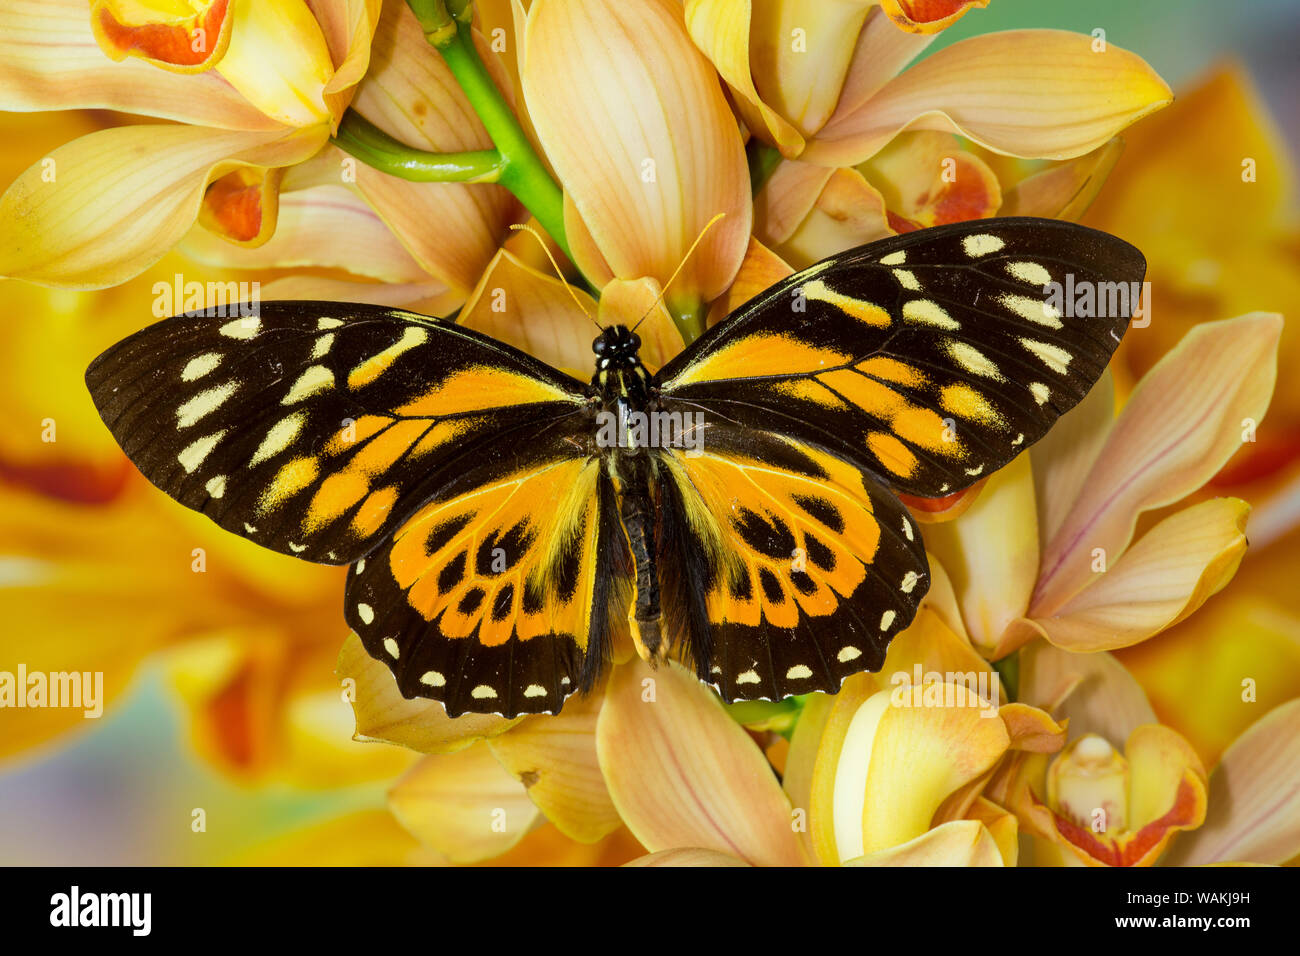 Orange and black butterfly, Papilio zagreuis, on large golden cymbidium orchid Stock Photo